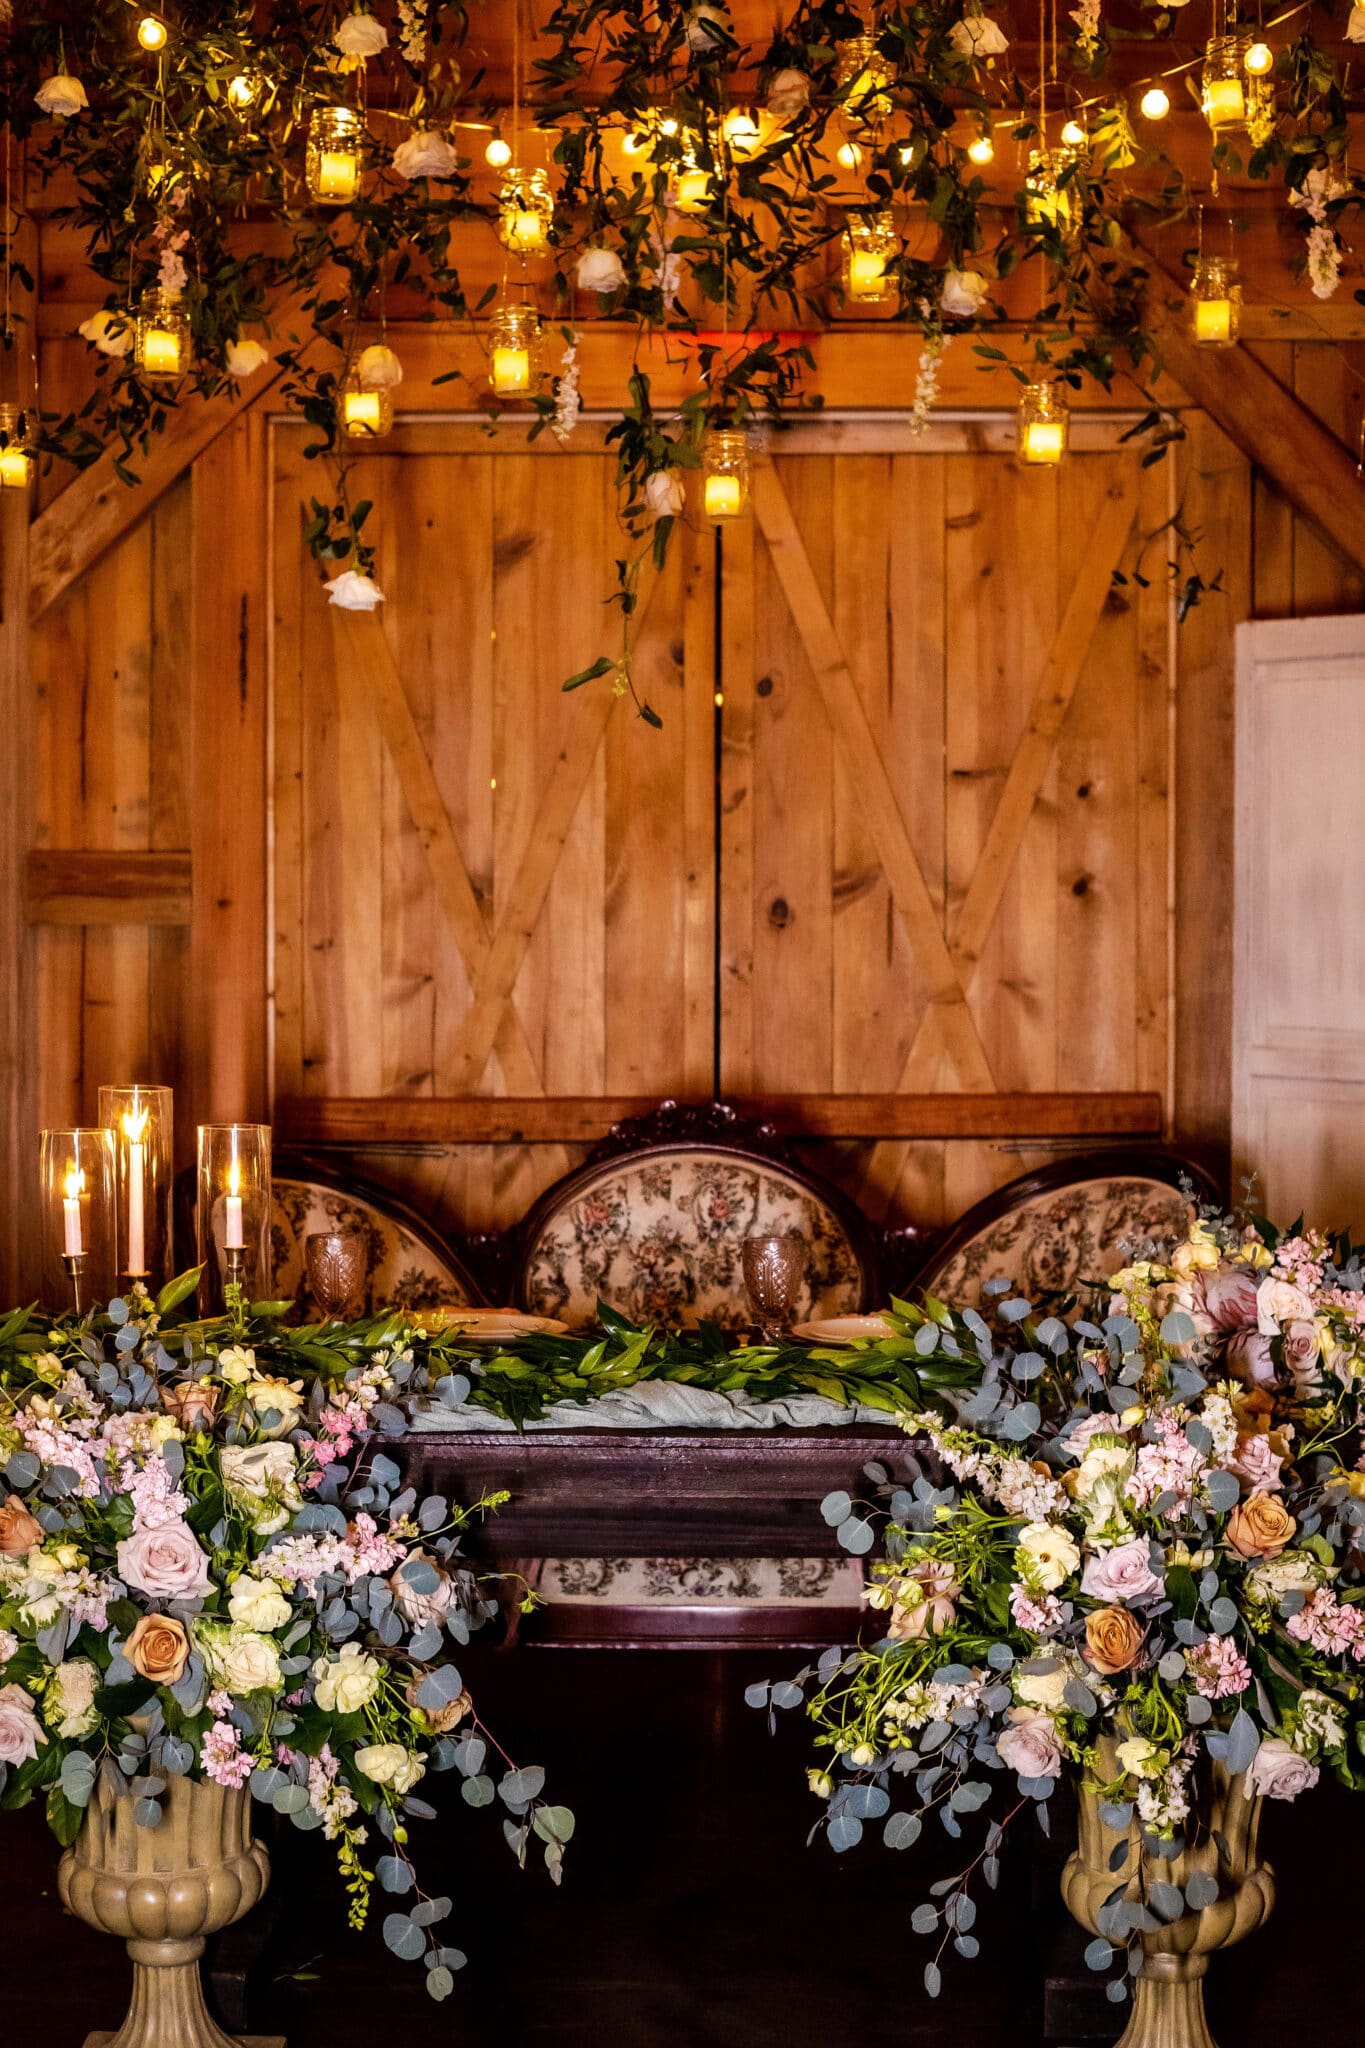 sweetheart table at wedding reception decorate with huge floral arrangements on the floor in front and vintage floral couch for seating with candlesticks on the table and hanging lights with greenery above it